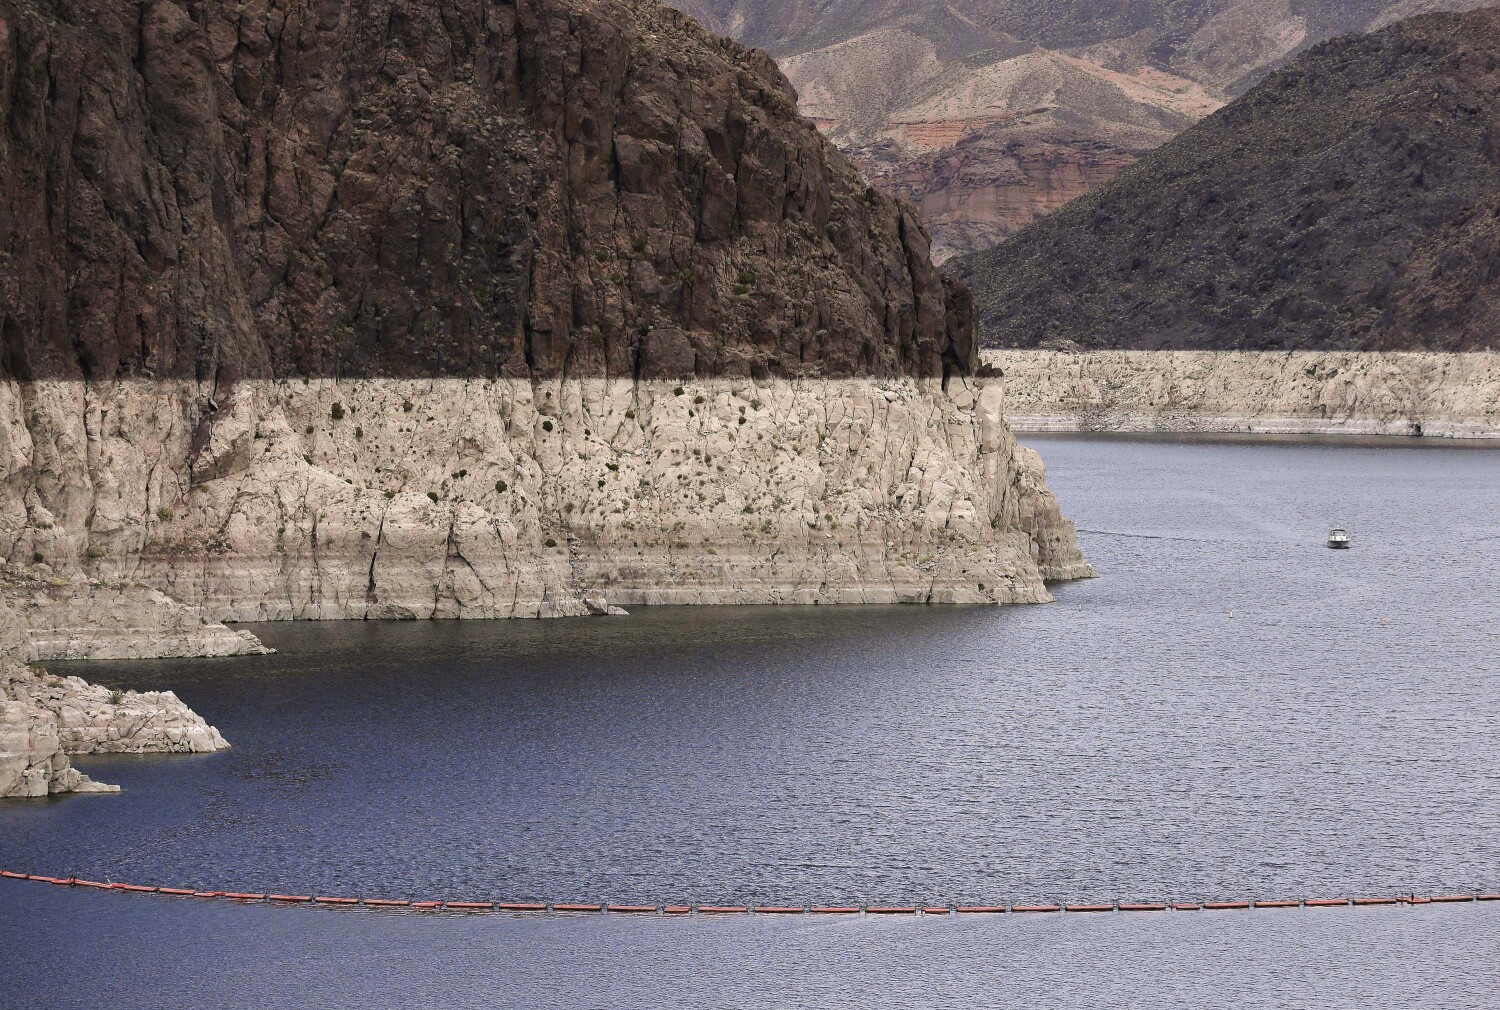 Global warming is making western U.S. 'megadrought' the worst in centuries, study says